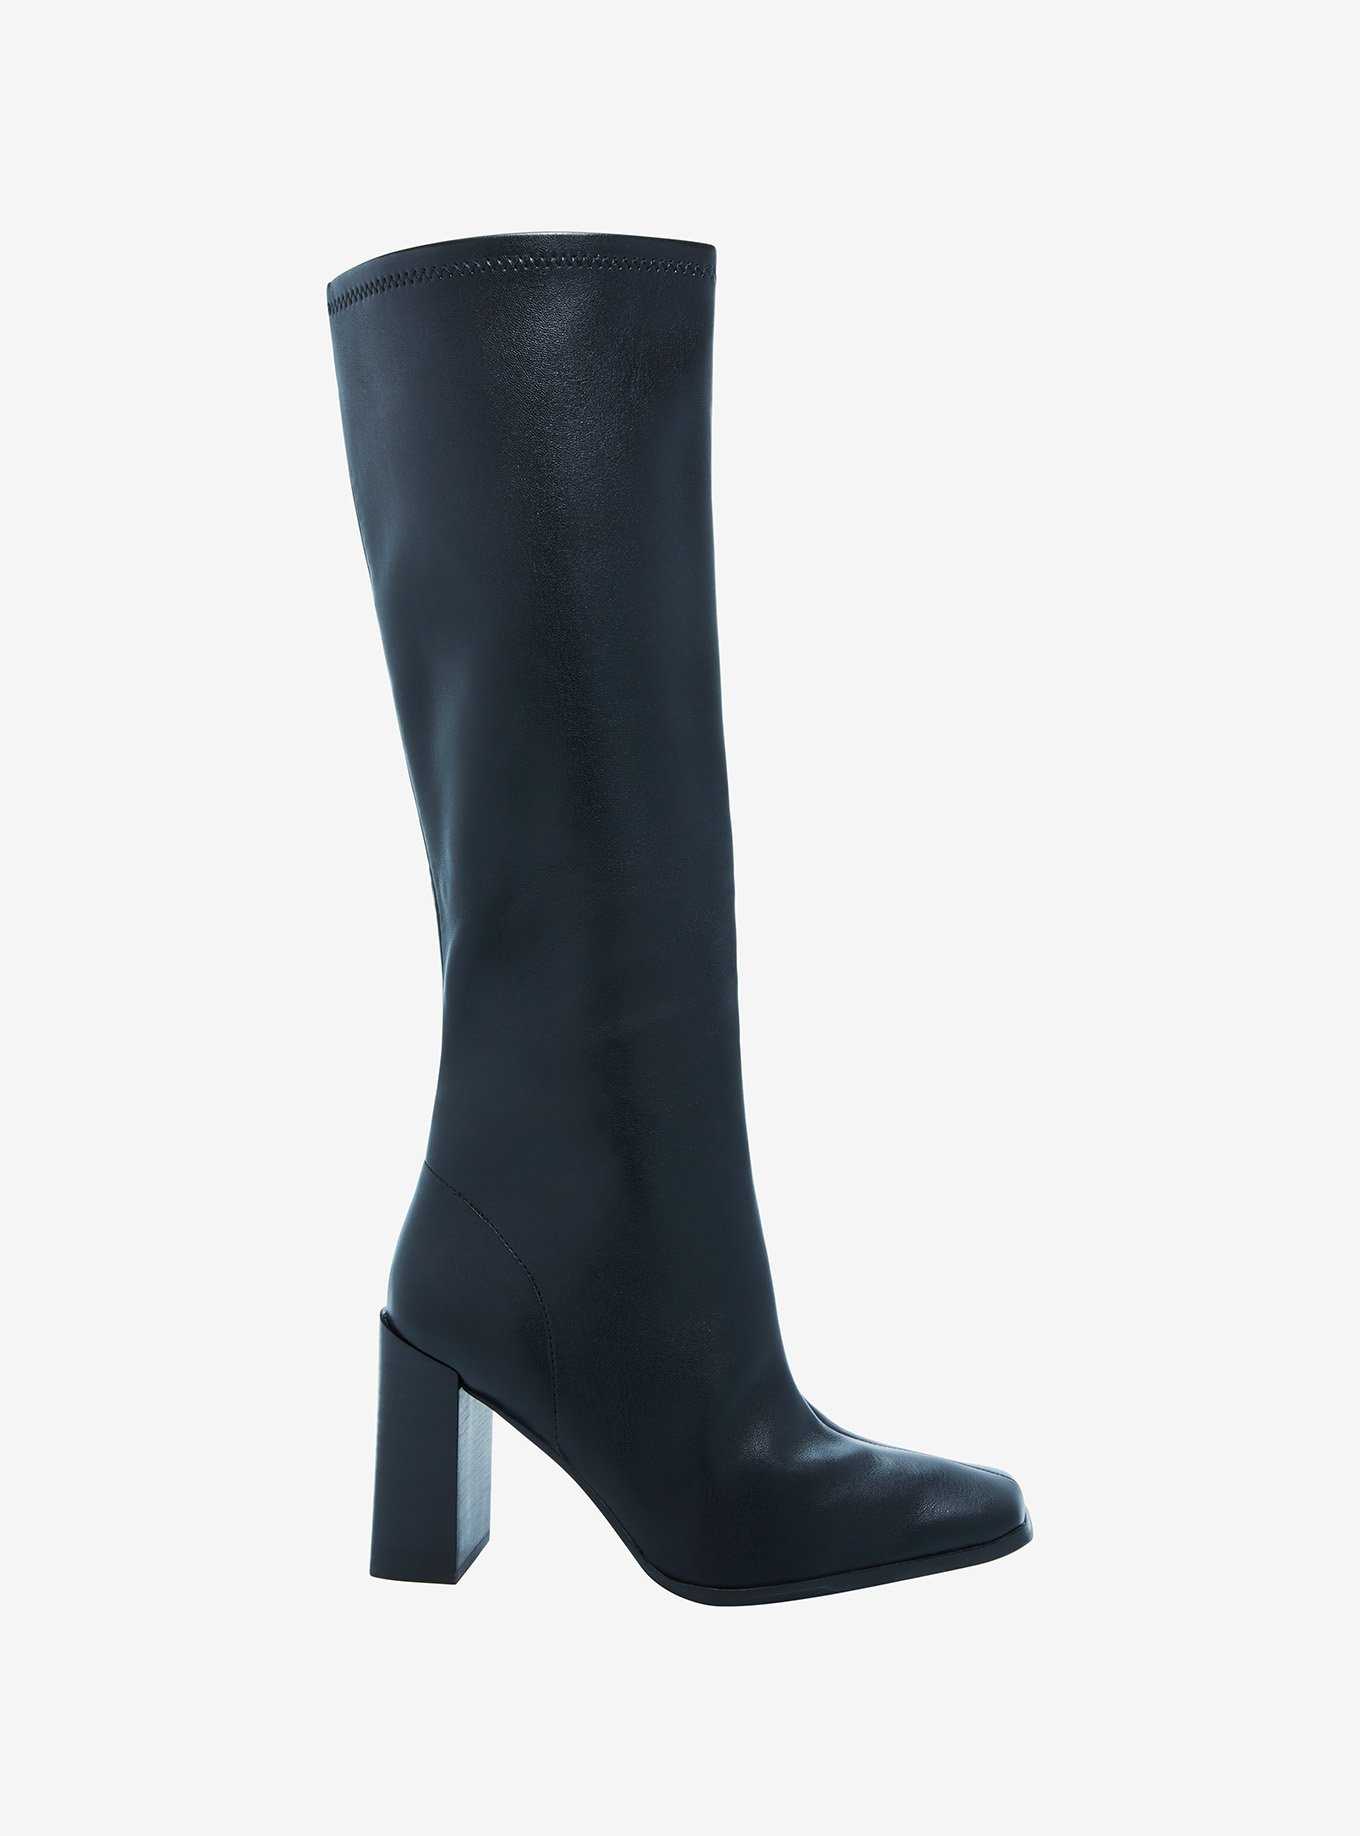 Chinese Laundry Black Square Toe Knee-High Boots, , hi-res